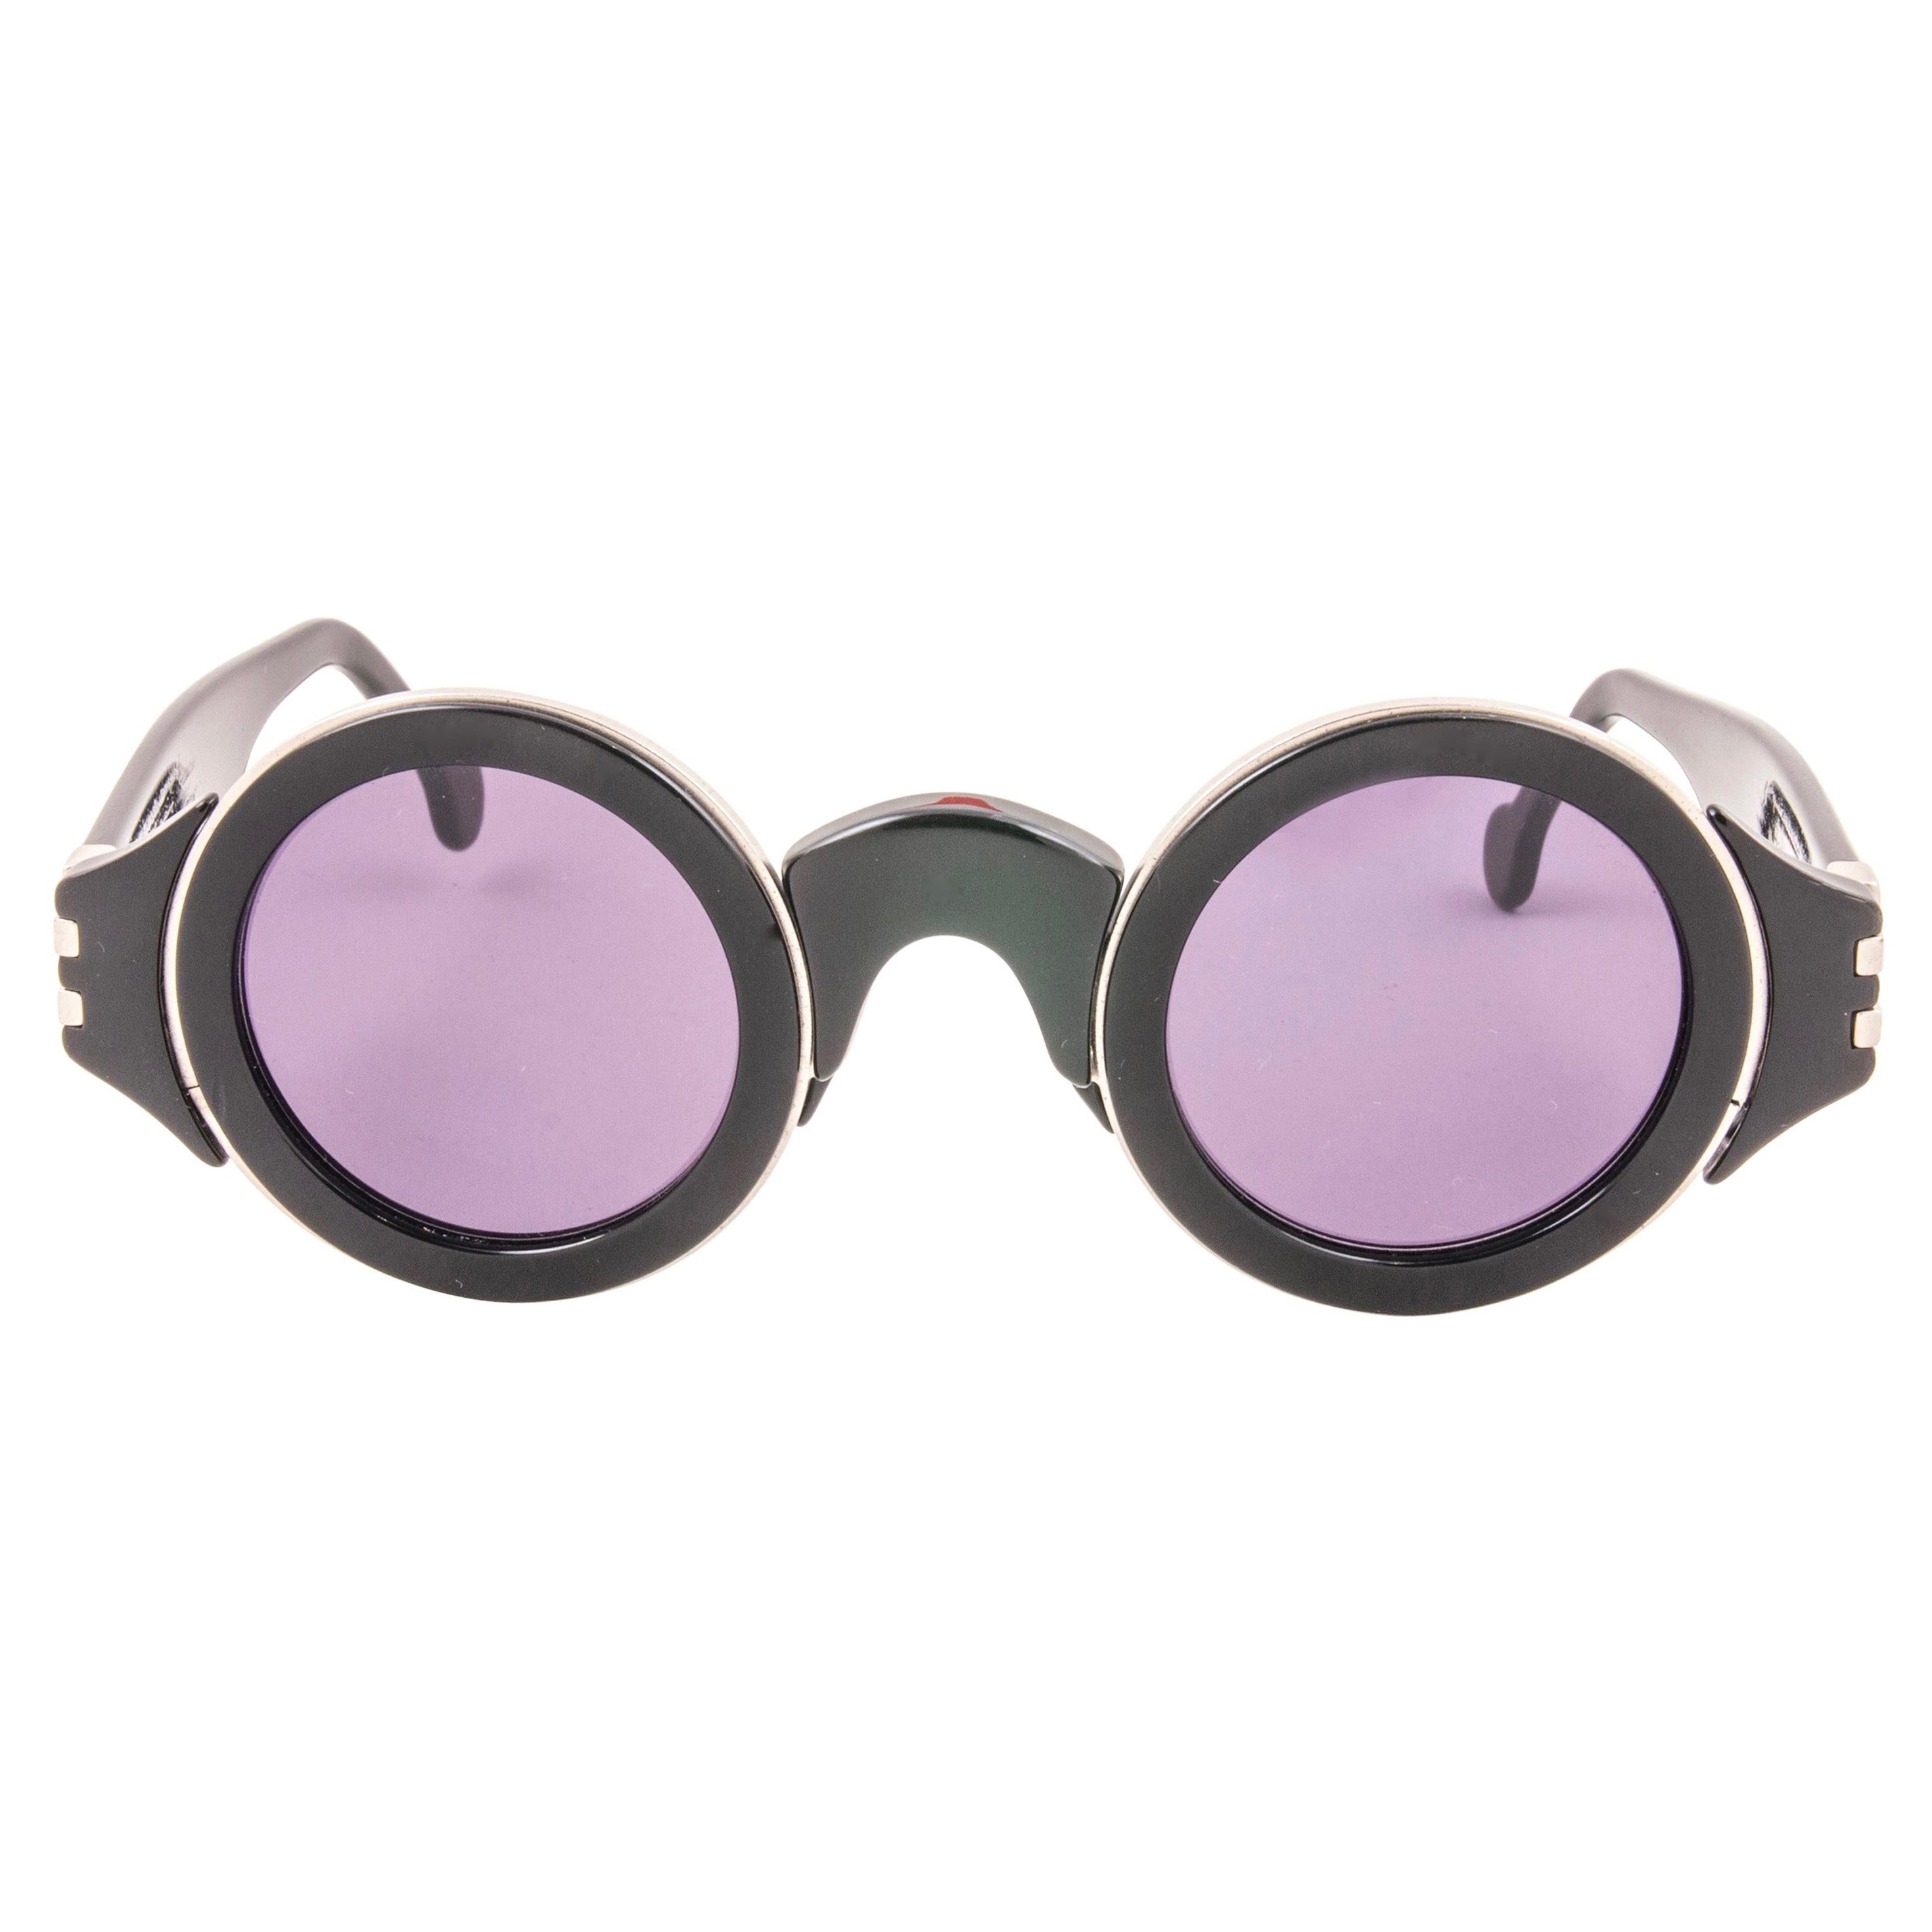 Karl Lagerfeld Vintage Round Black and Silver Sunglasses Made In Germany, 1980s